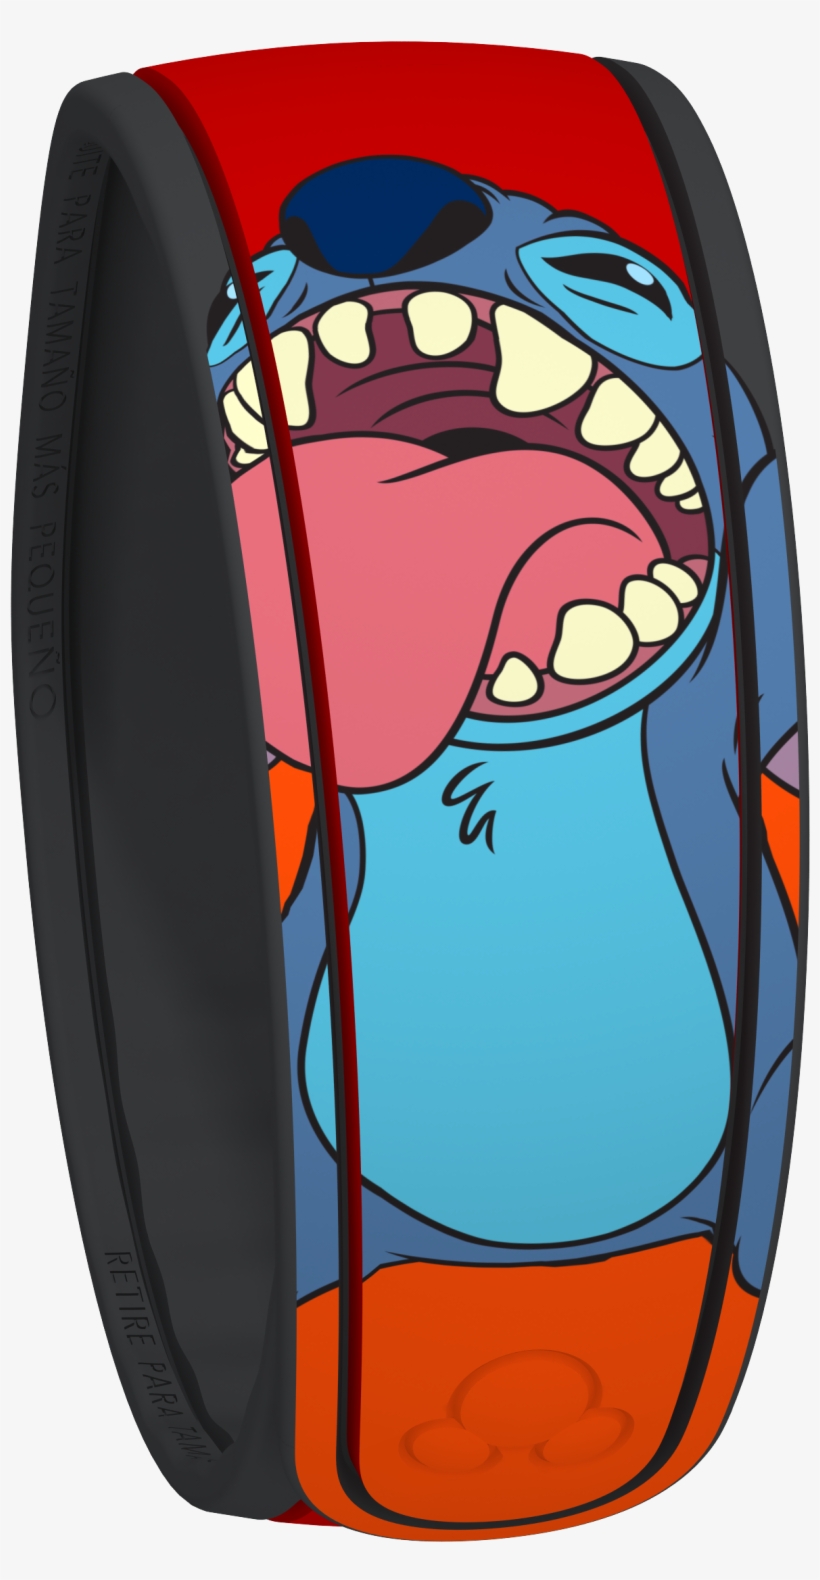 Stitch Magicband - All Magic Band Characters, transparent png #2986326